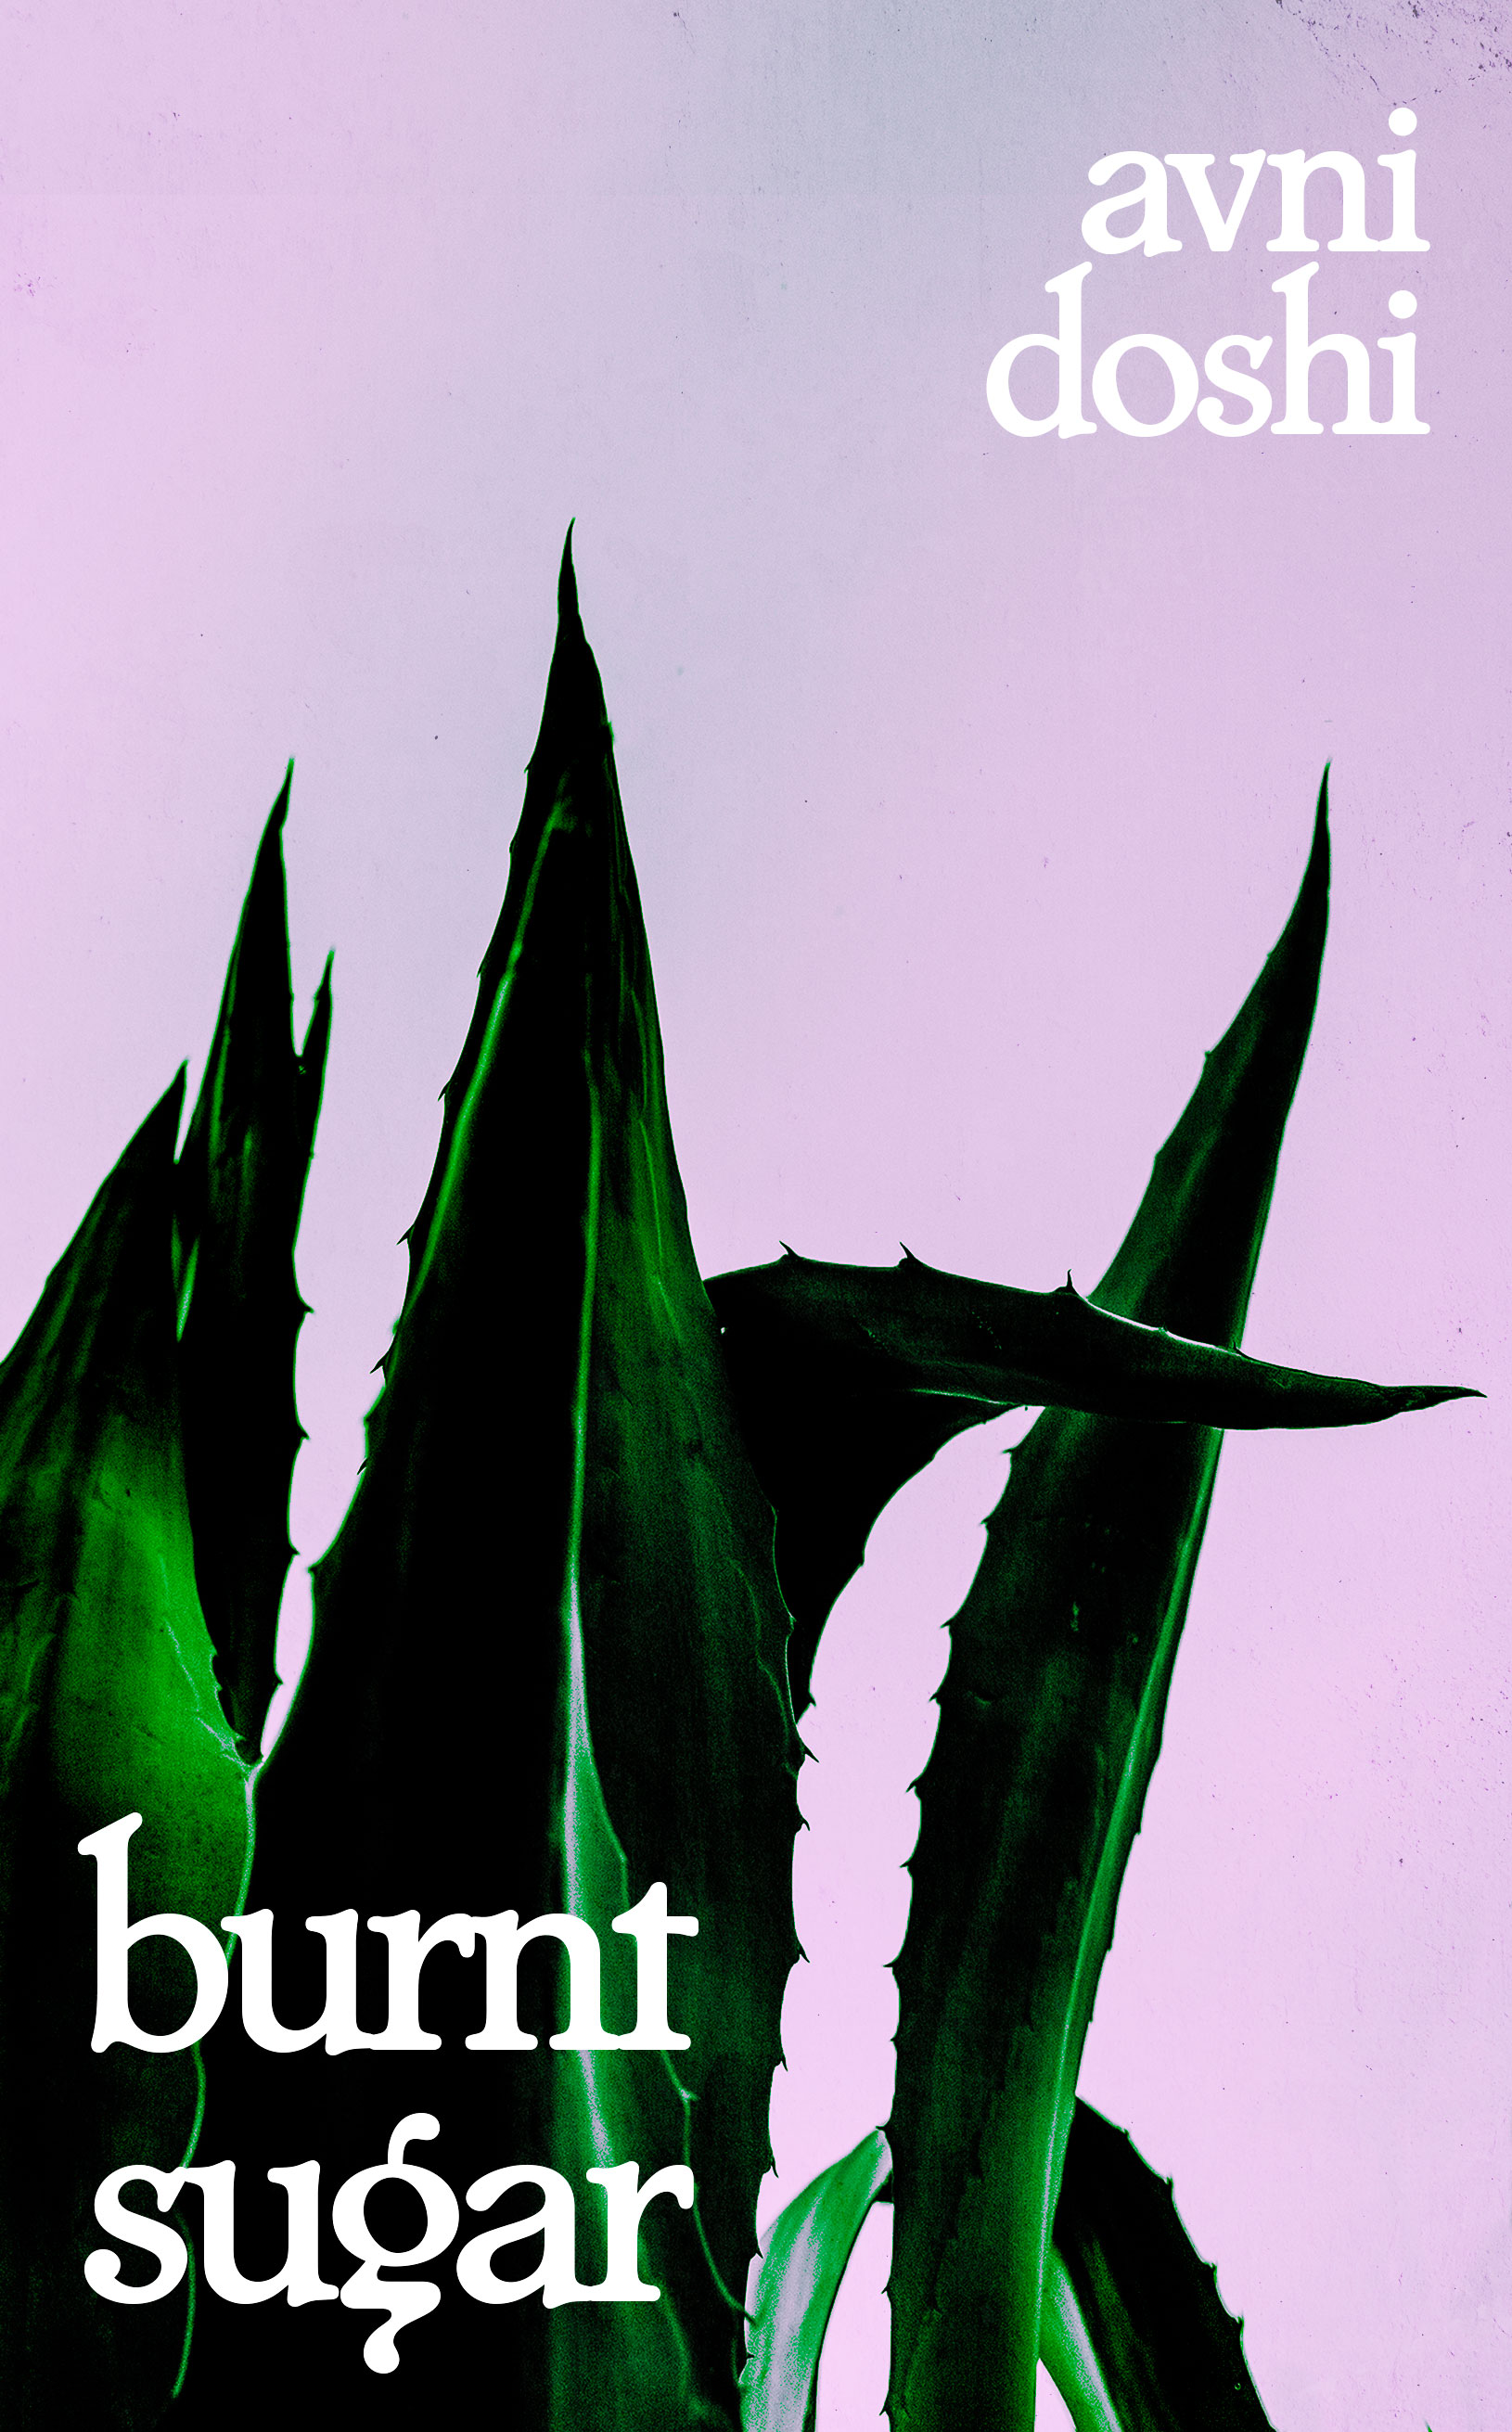 Burnt Sugar by Avni Doshi, a book cover